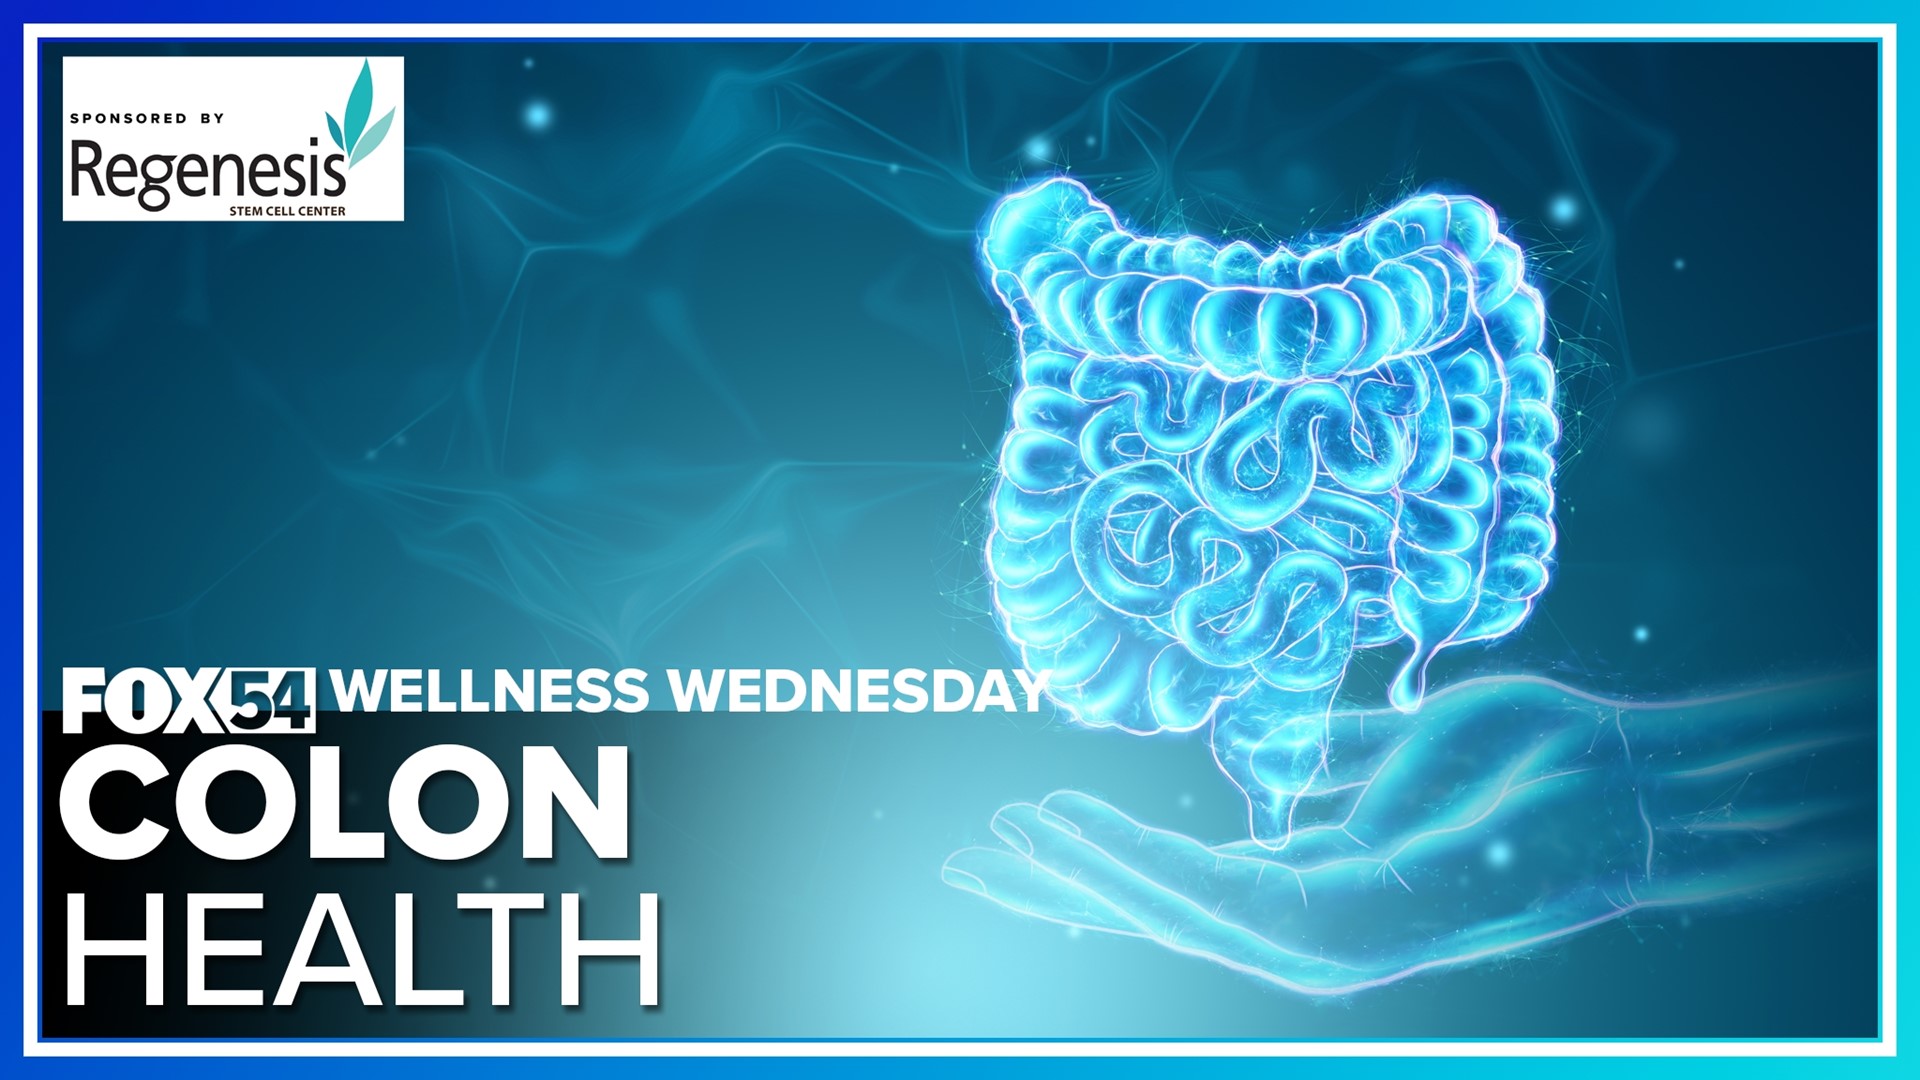 March is colon cancer awareness month. According to the American Cancer Society, *excluding skin cancers*, colorectal cancer is the *third* most common cancer.